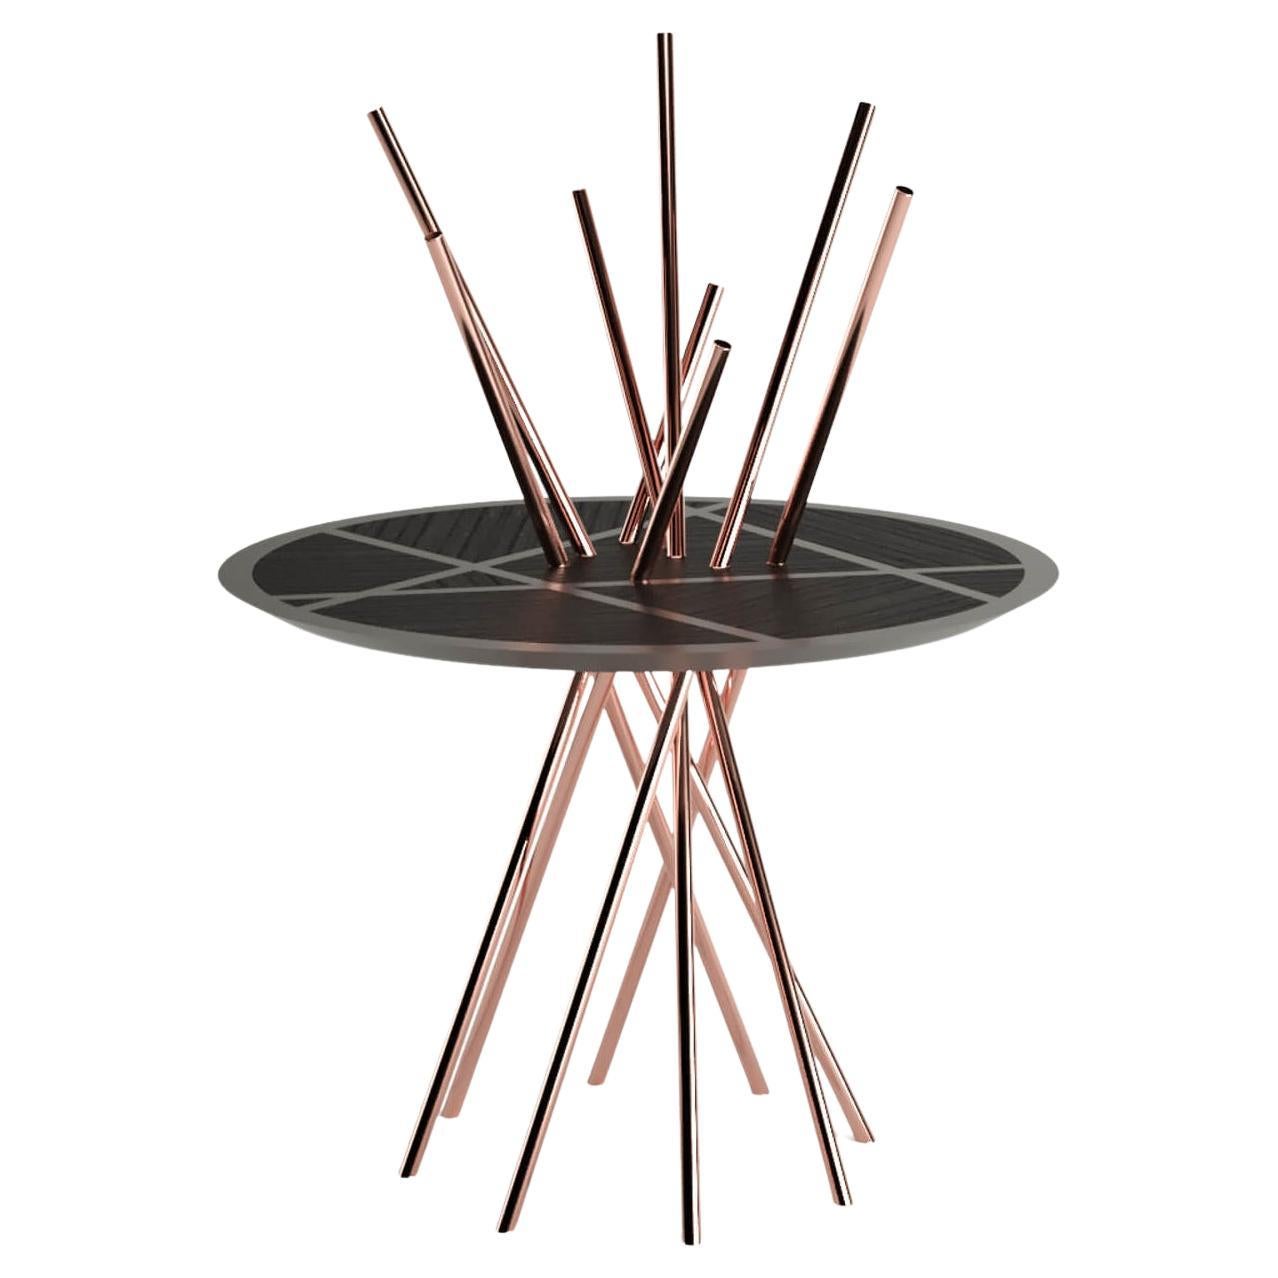 The Modernity Round Pedestal Table Ebony Macassar Wood Black Lacquer Brushed Brass en vente 2